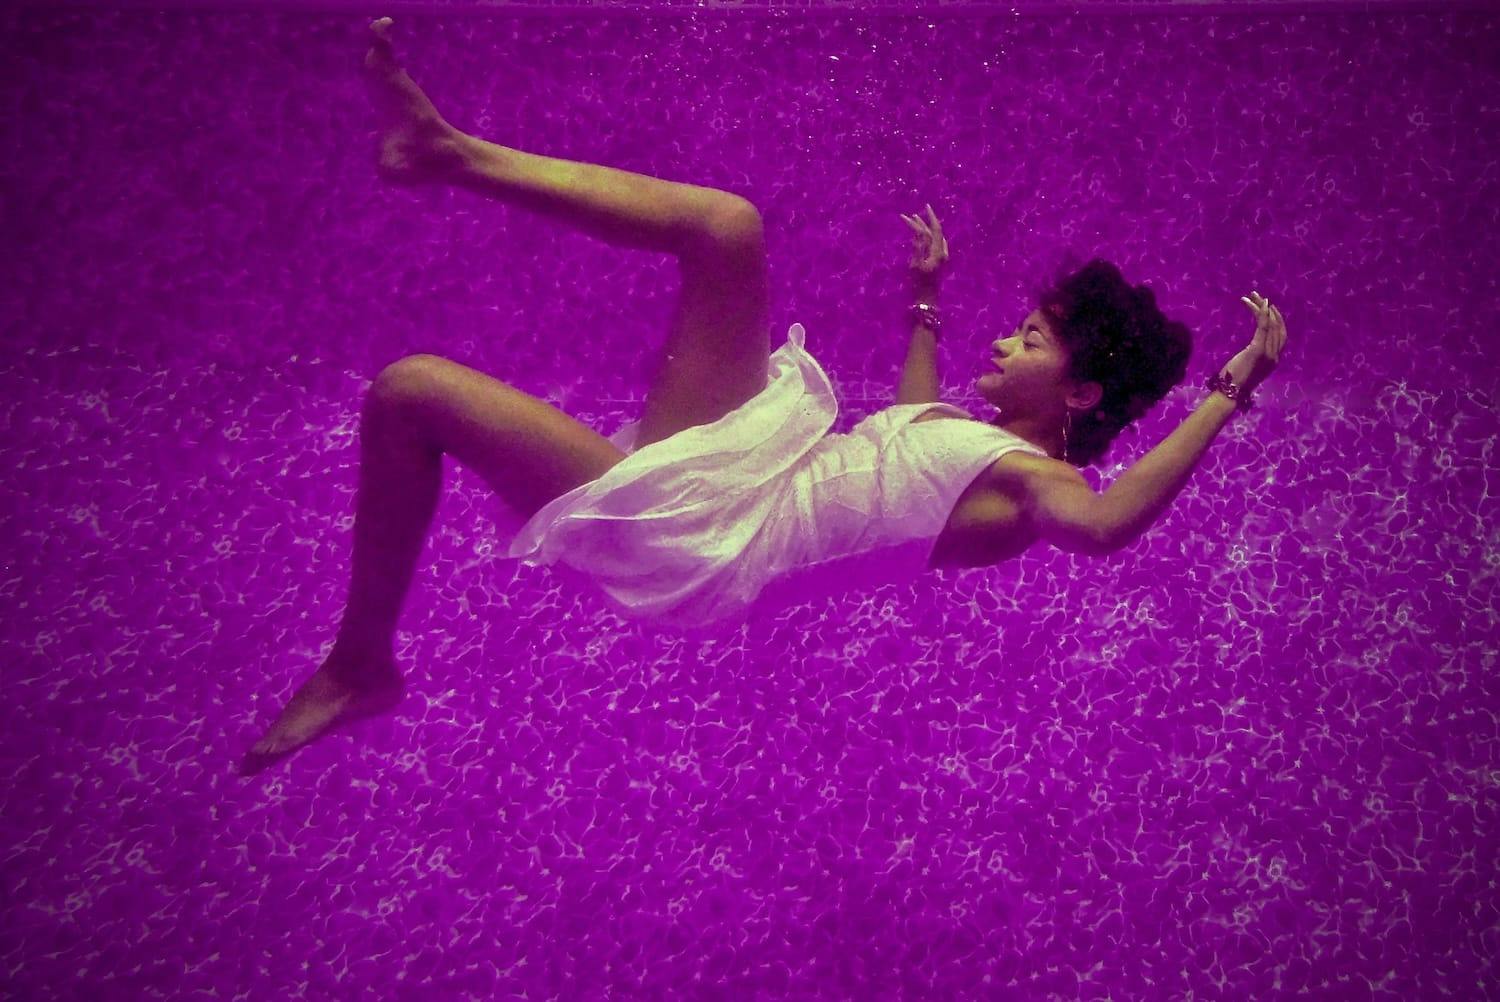 Person shows a woman falling in her sleep with purple background.